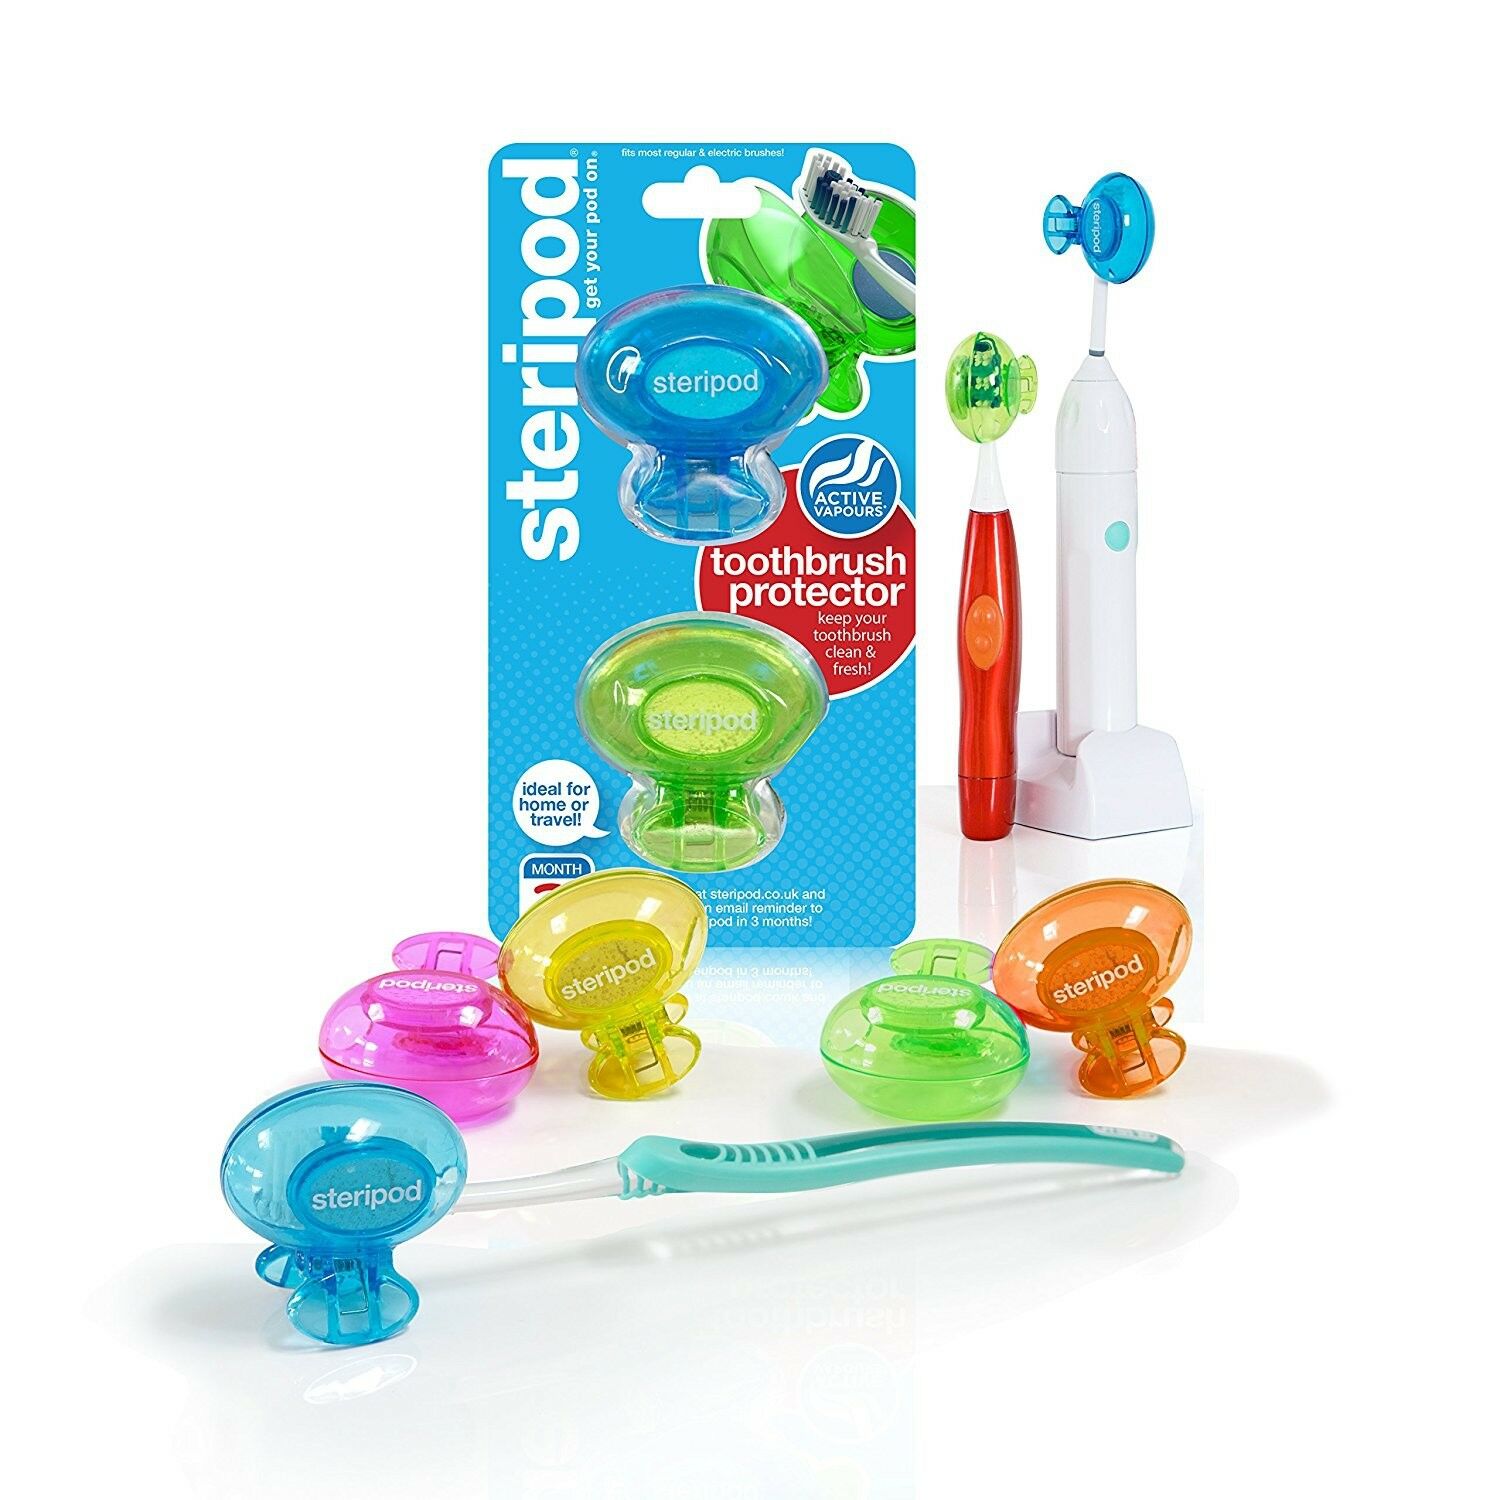 steripod ENE03-BRK Toothbrush Protector Dual Pack (Assorted Colors) - image 2 of 6